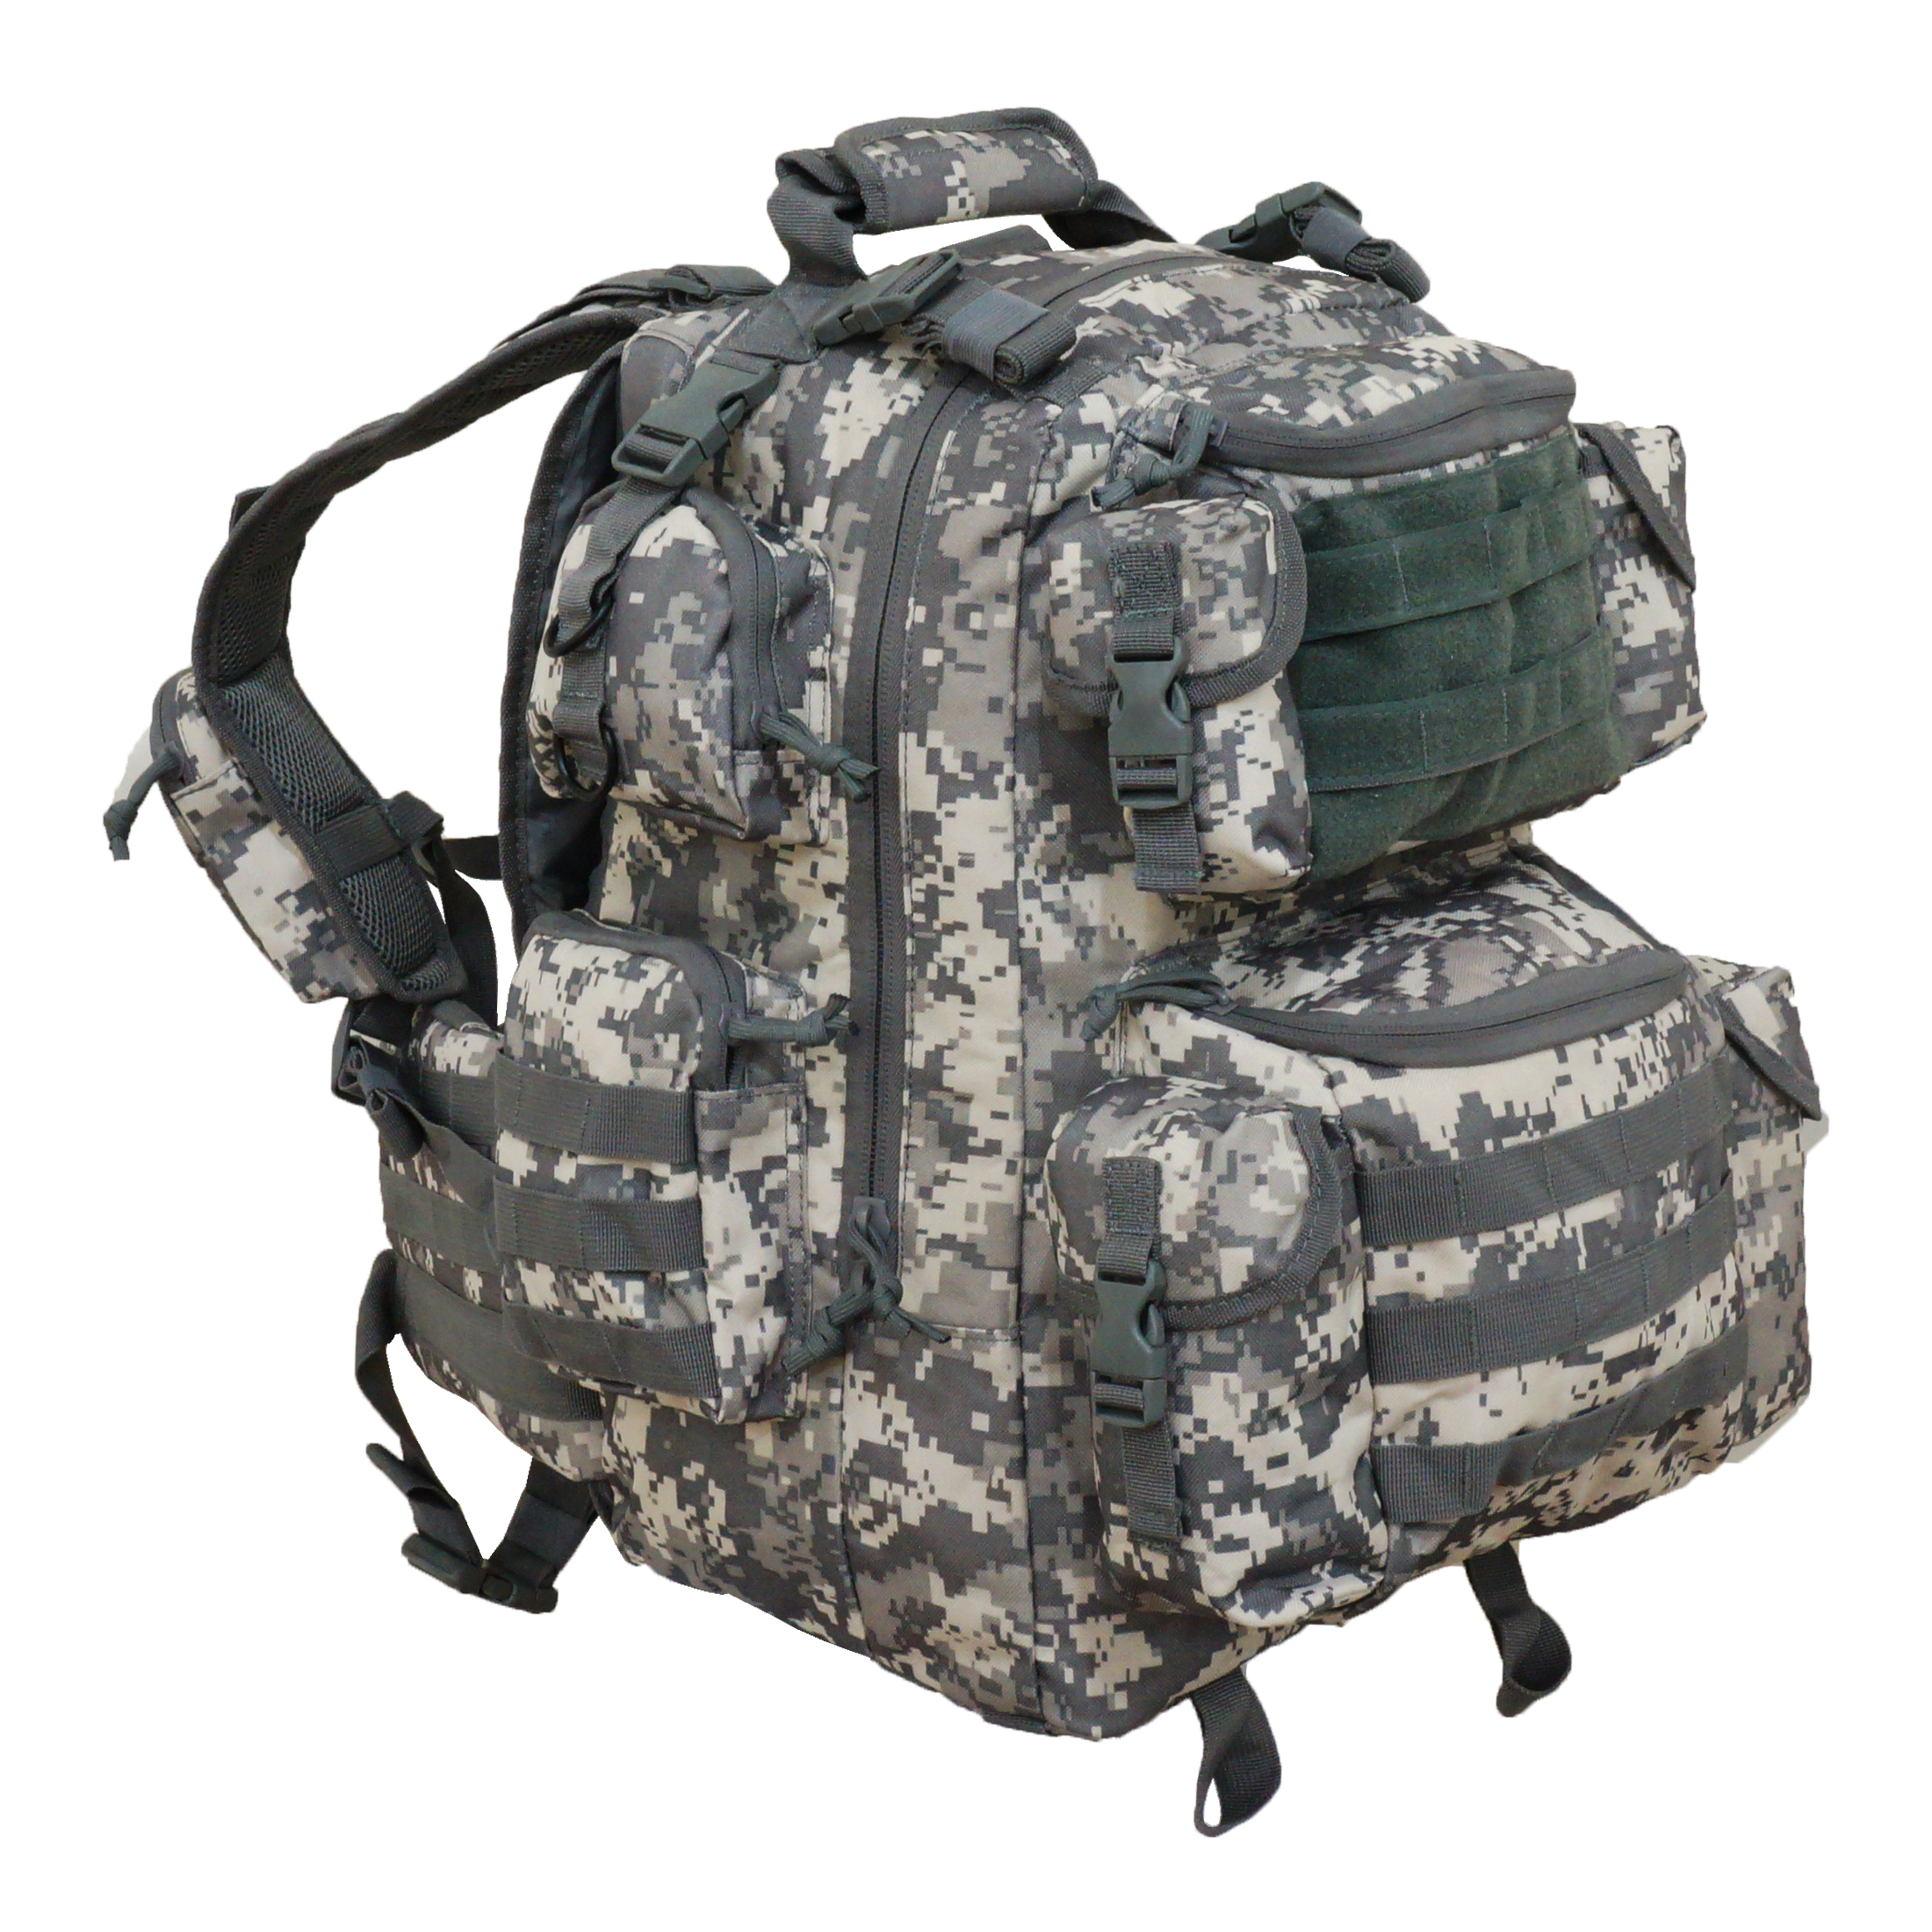 Every Day Carry Ultimate 3 Day Tactical Backpack Hydration Ready + Molle System